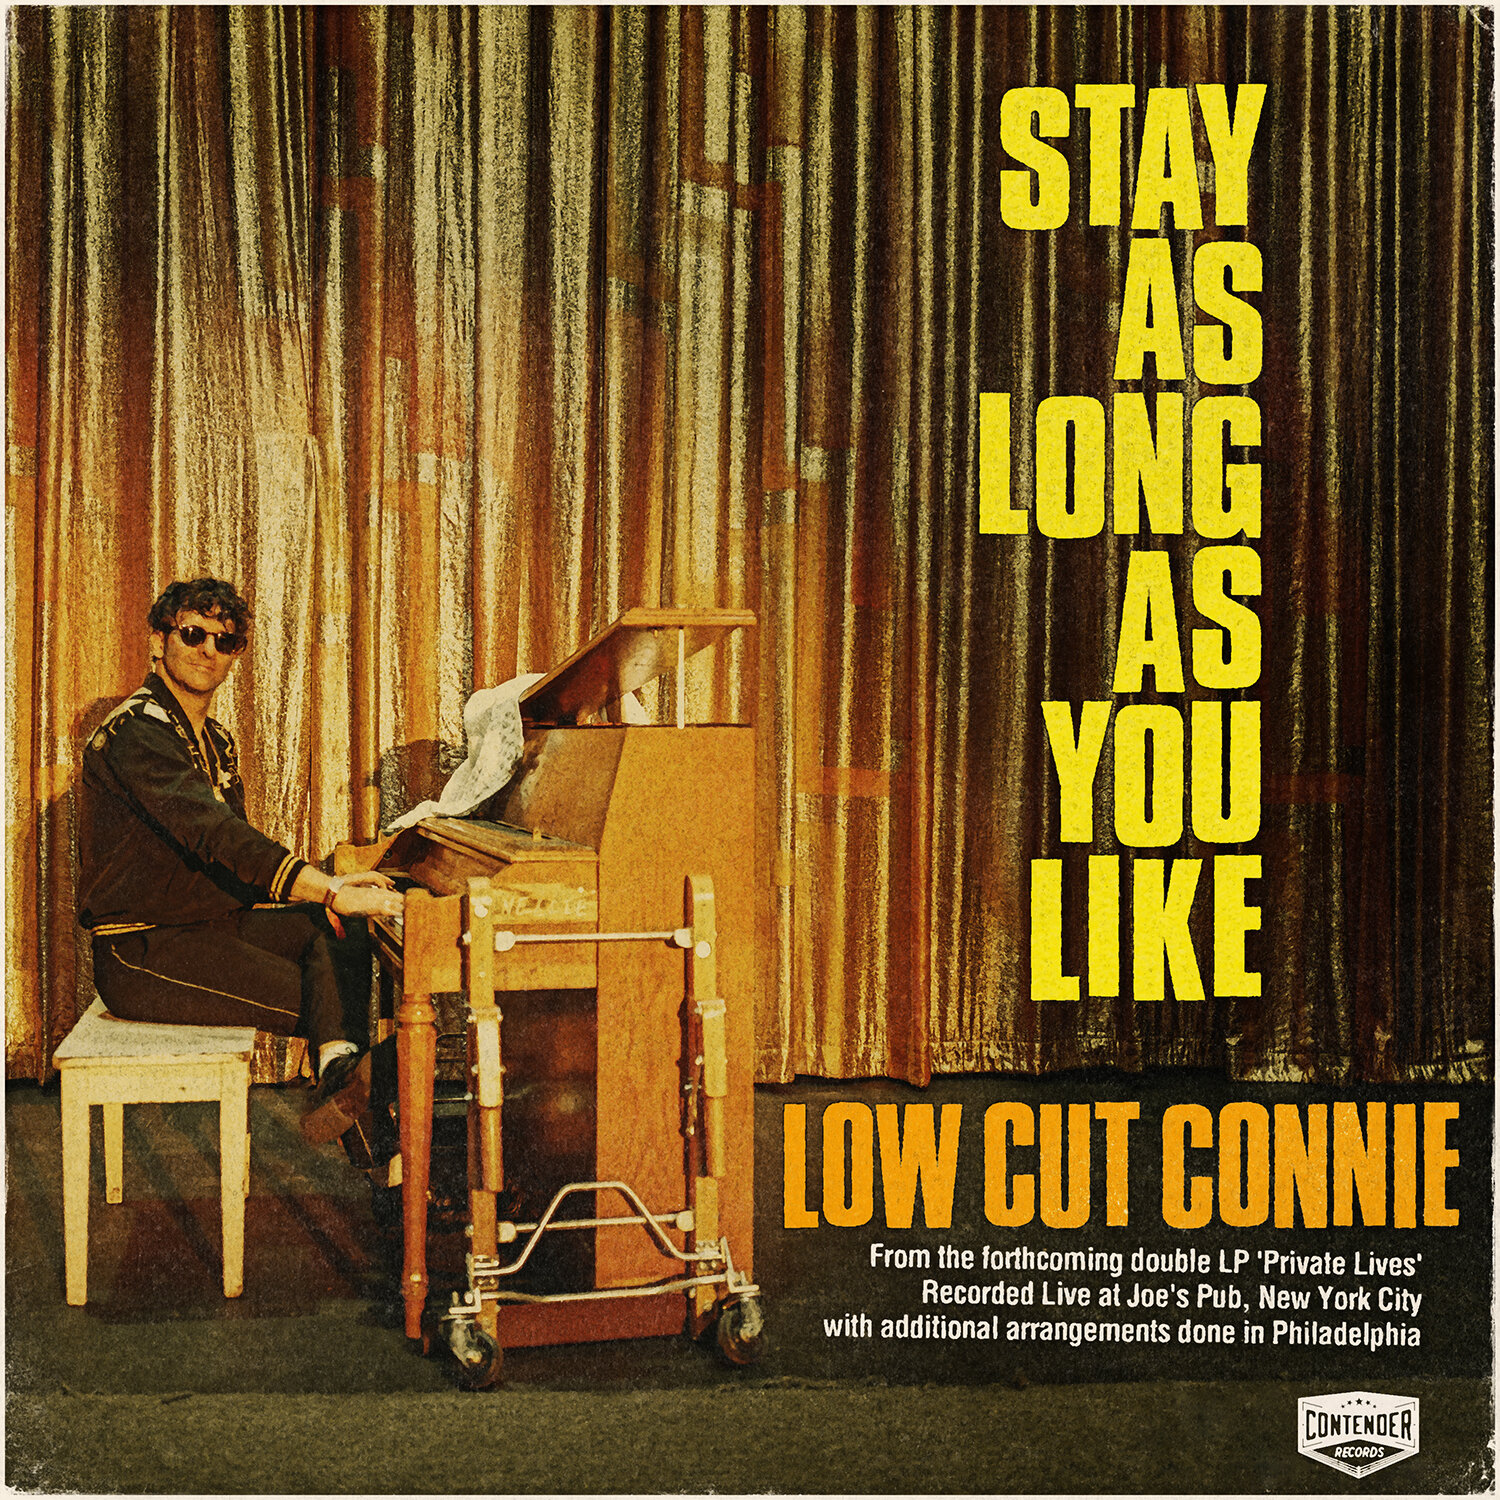 Low Cut Connie "Stay As Long As You Like"